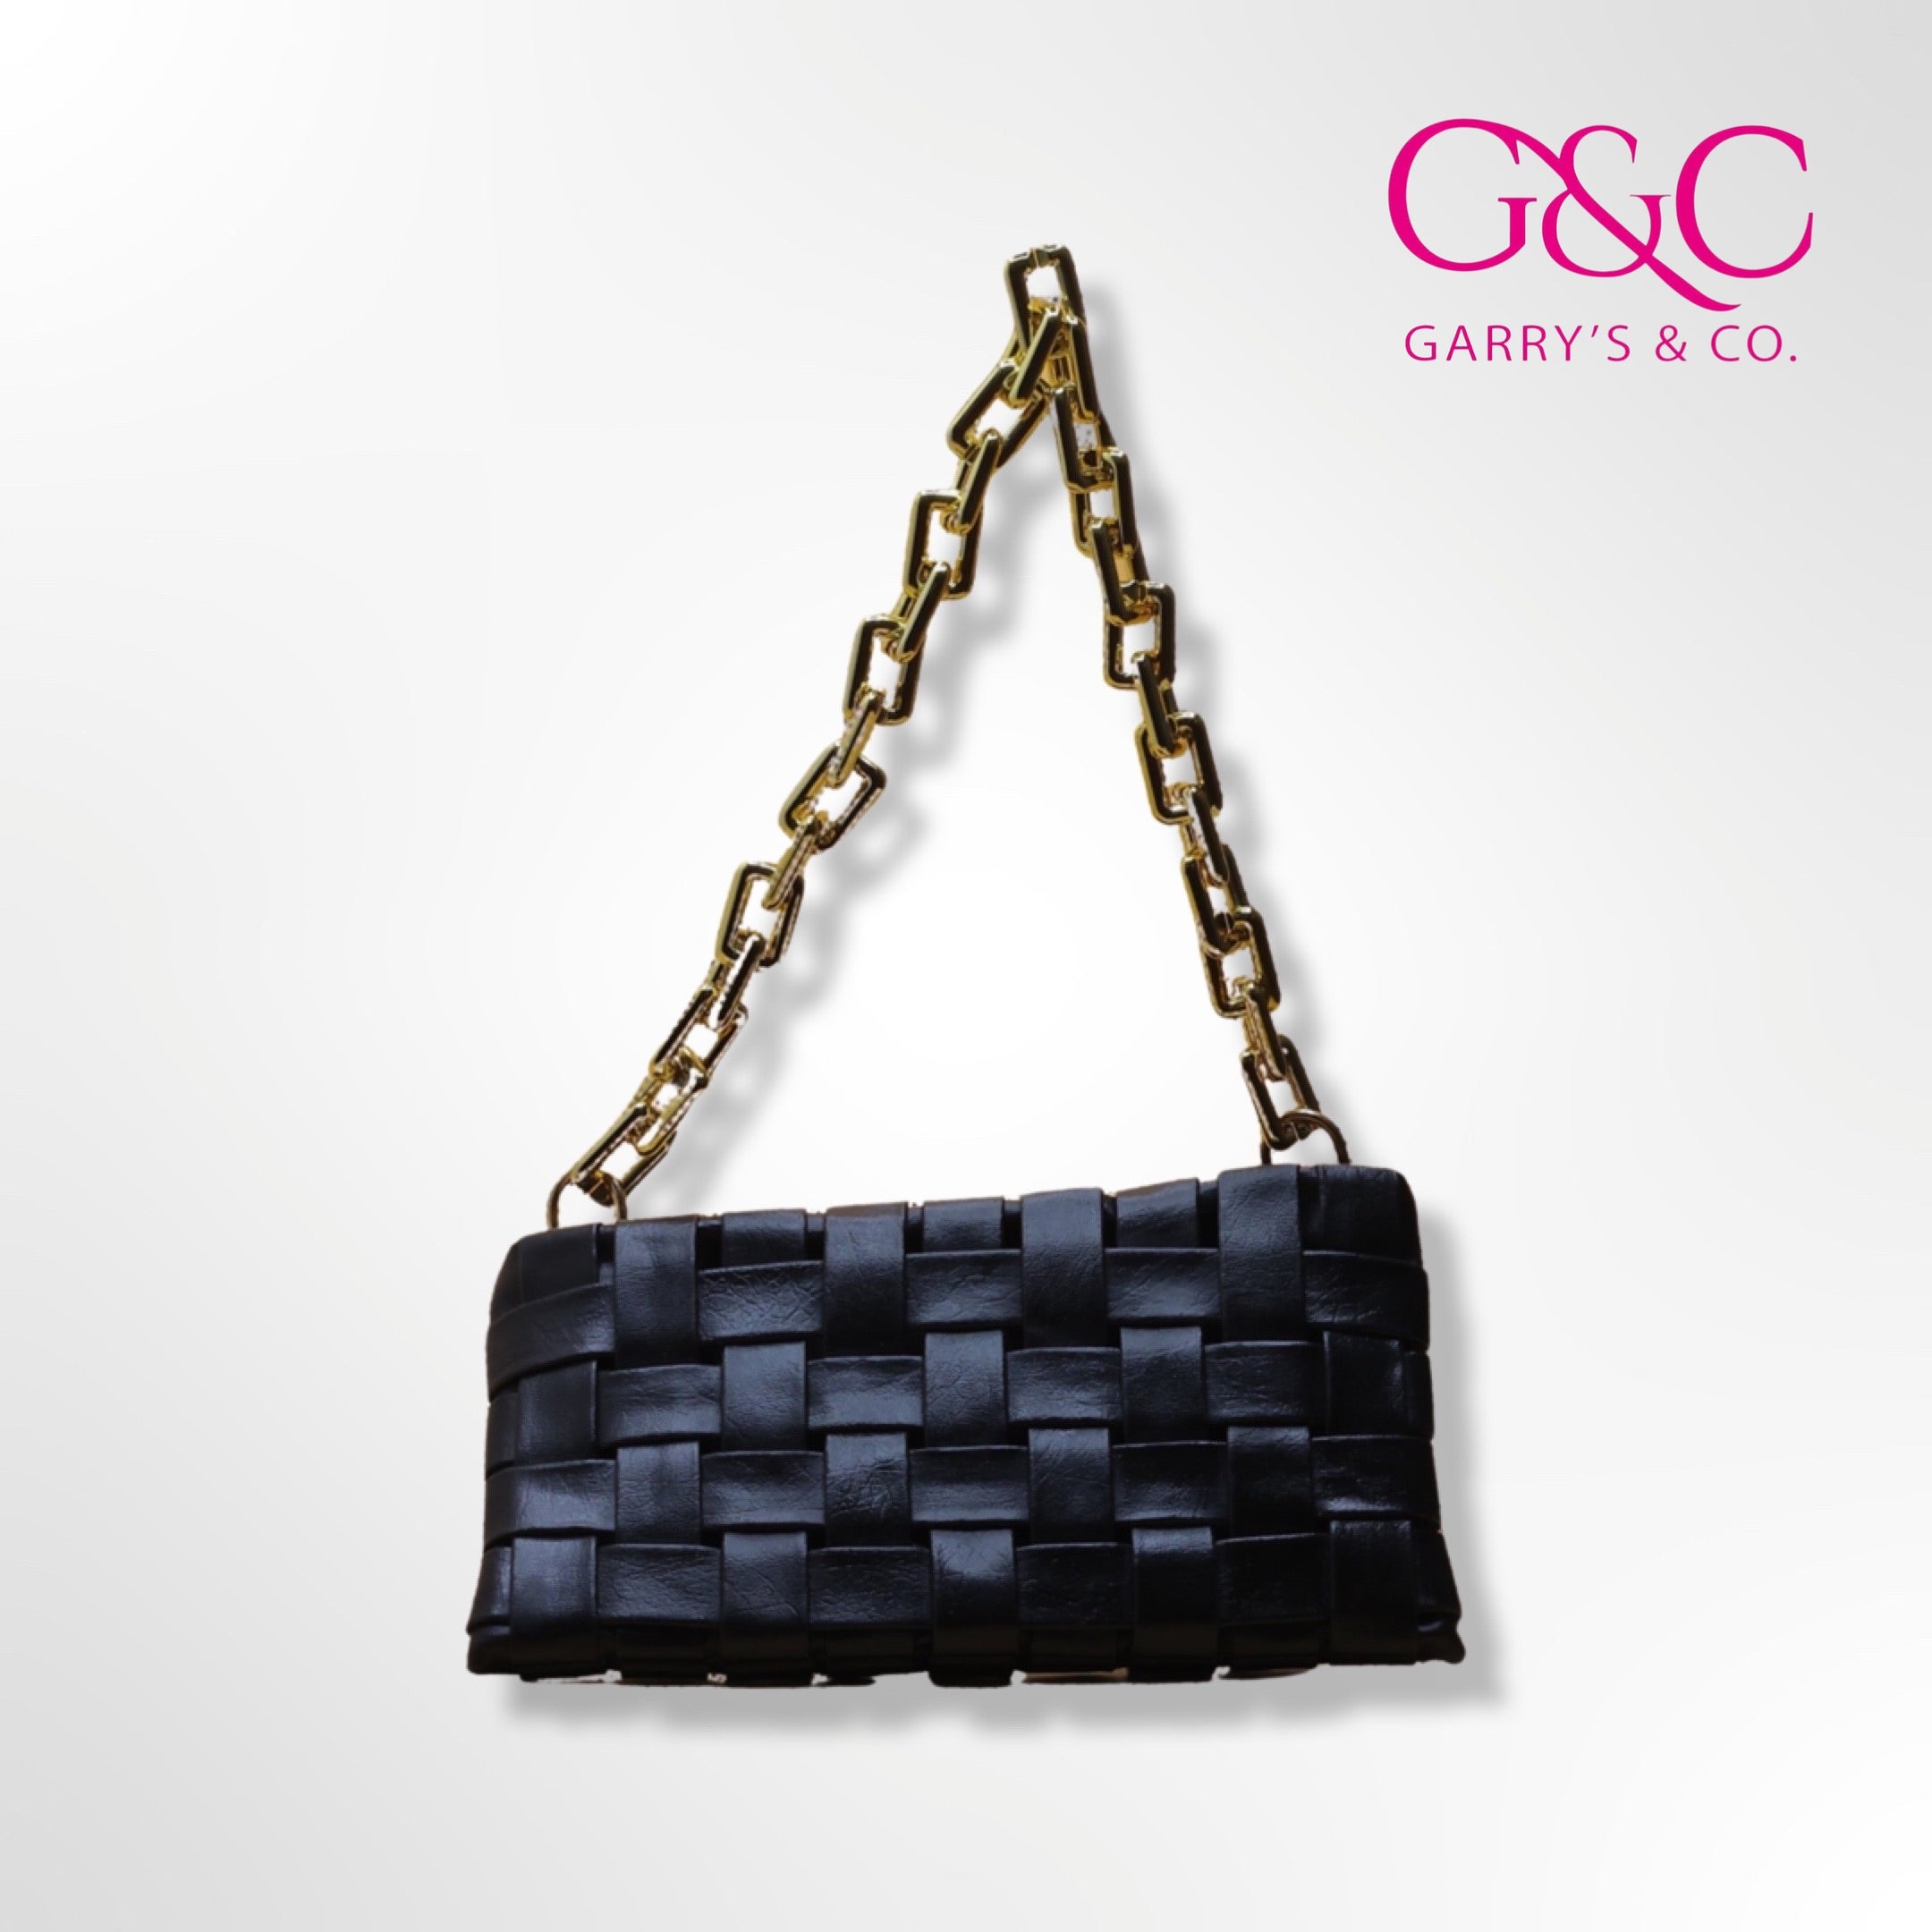 G&C WEAVING BLACK CLUTCH WITH CHAIN STRAP 8A